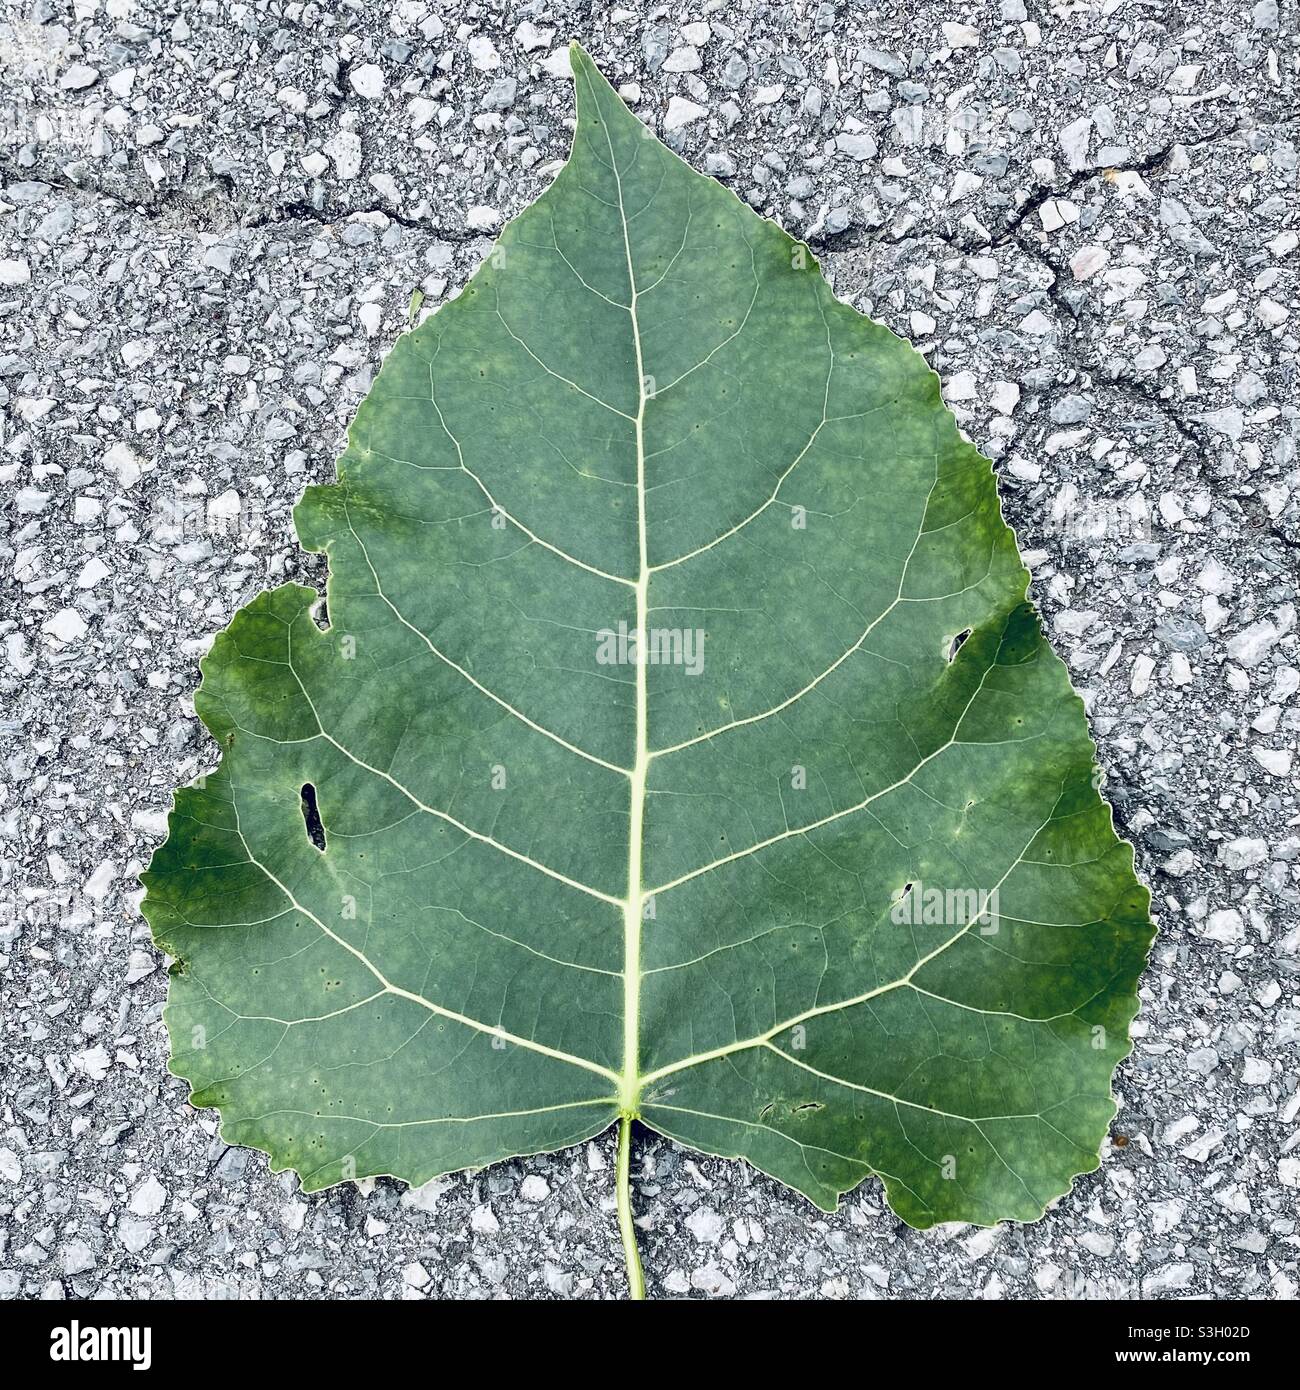 Green leaf on a road Stock Photo